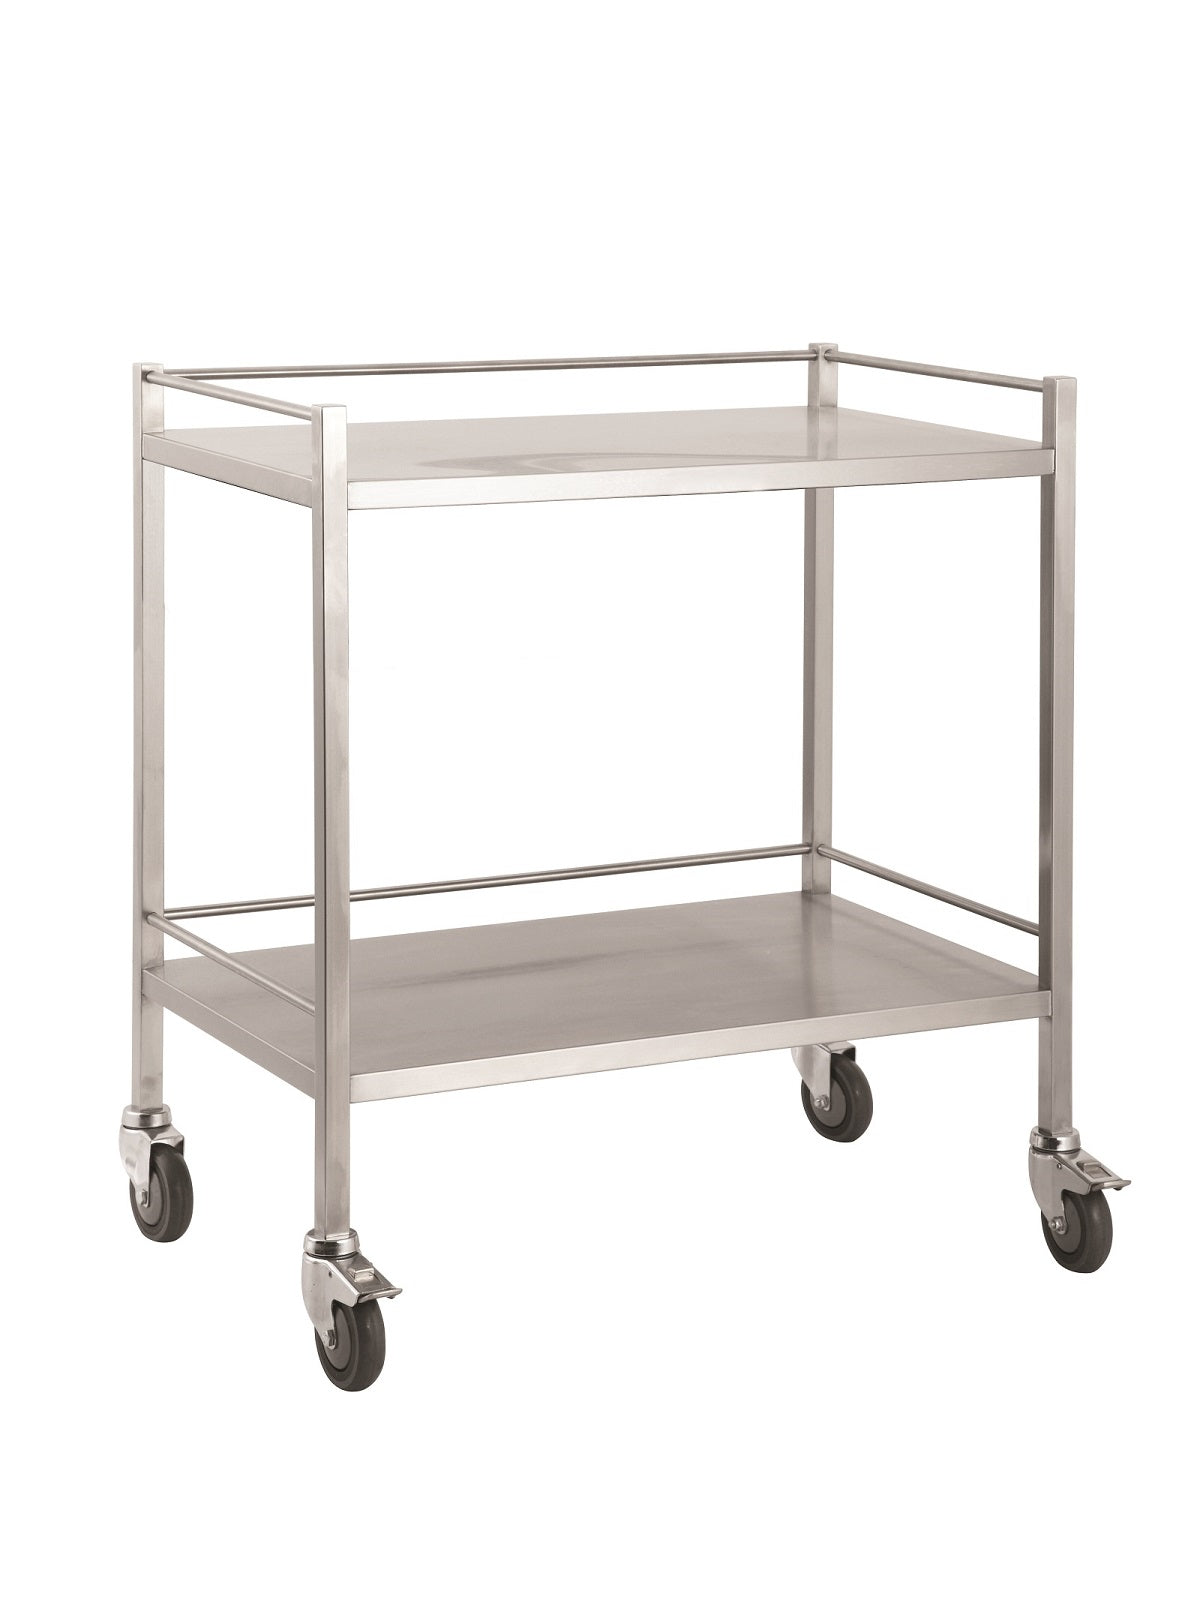 A high grade double stainless steel trolley with no drawer. Has top and bottom side rails and lockable castors for safety.